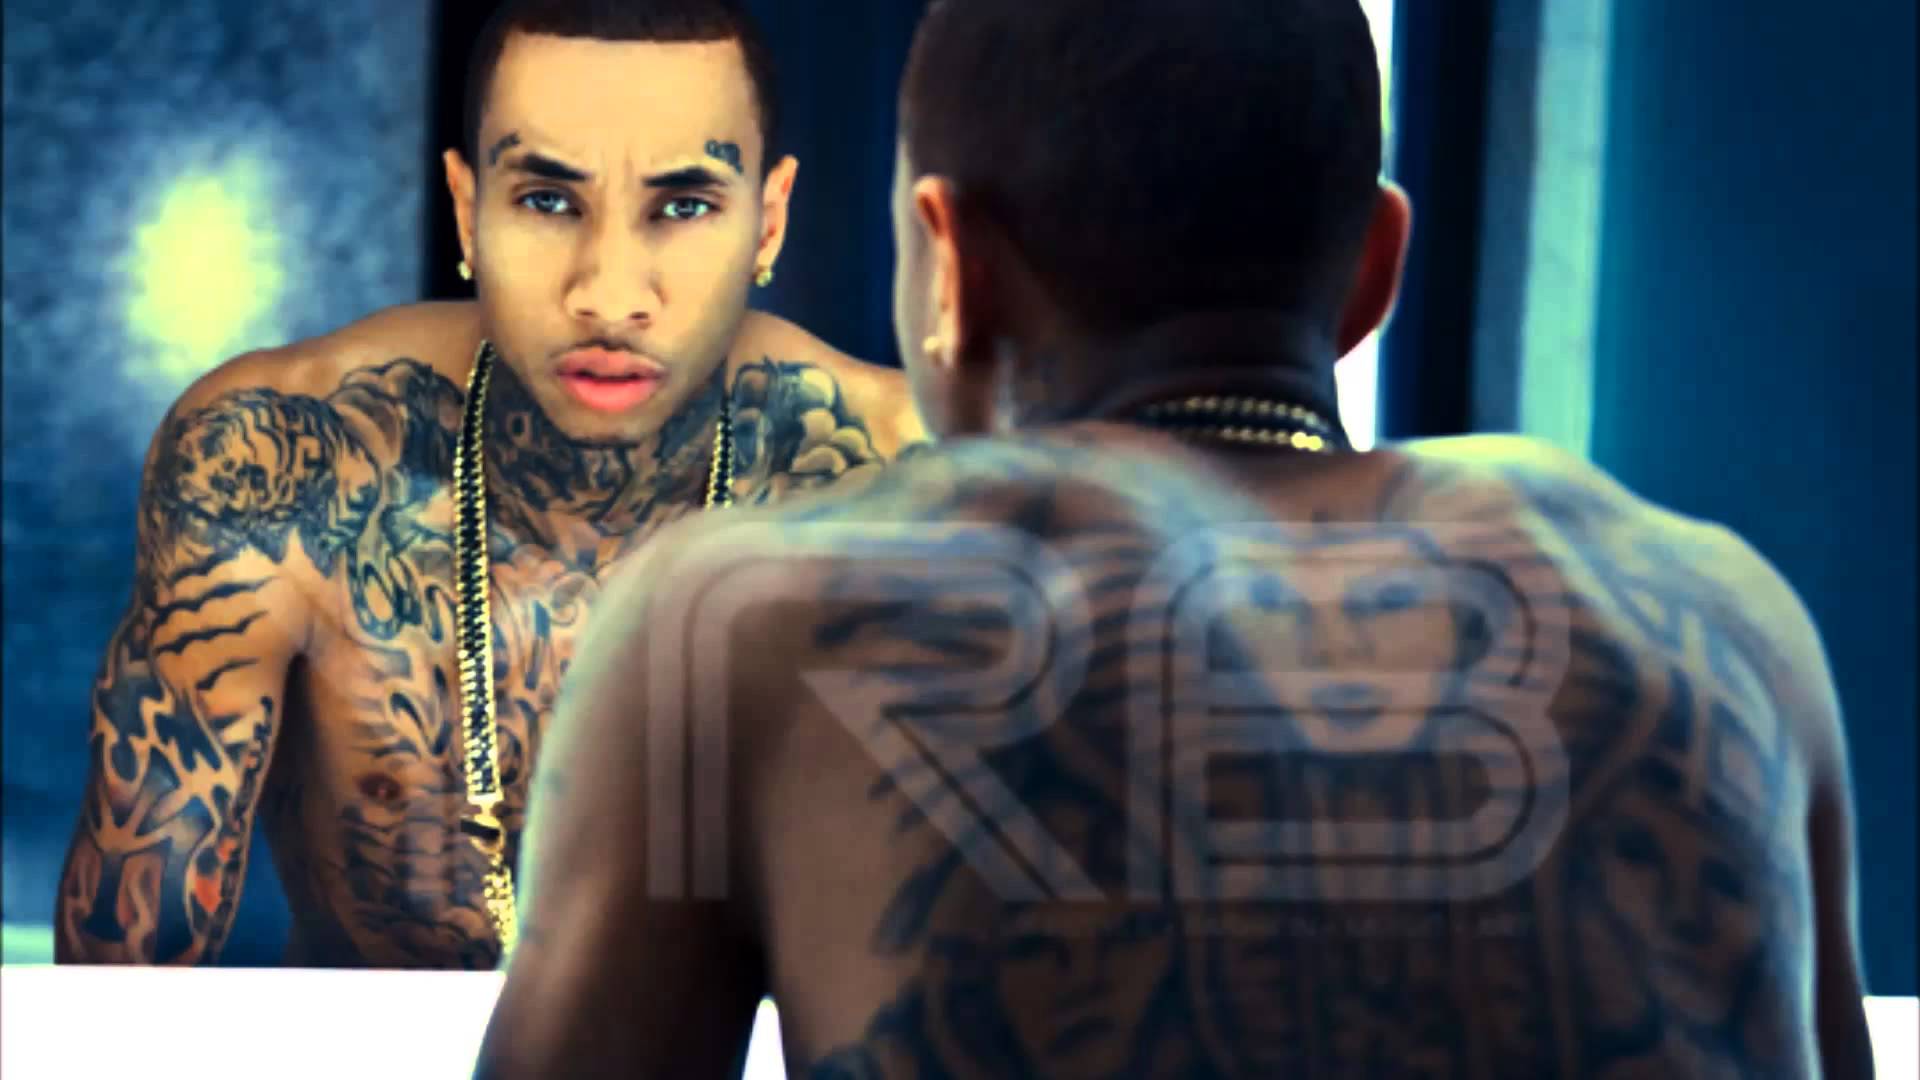 Tyga Wallpaper Image Photo Picture Background 1280×720